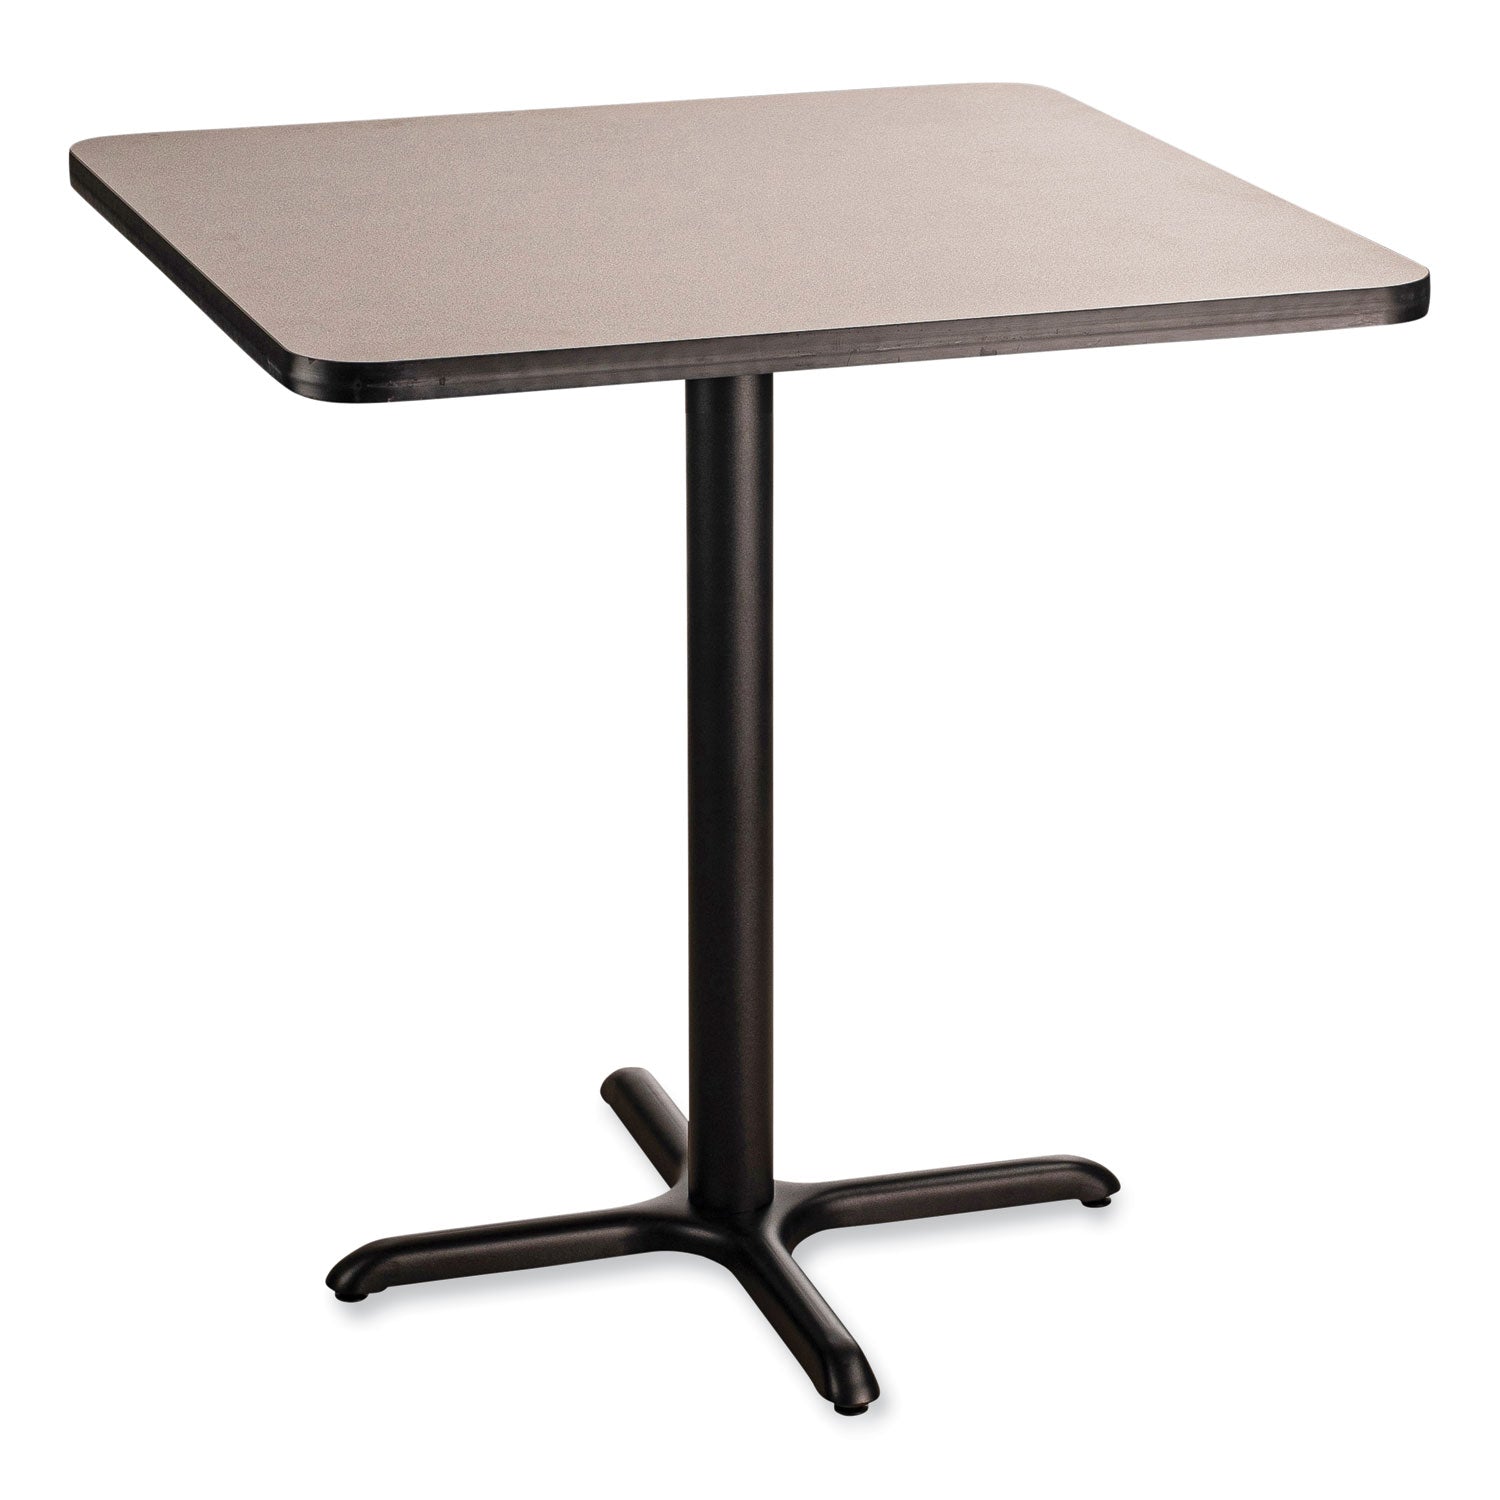 cafe-table-36w-x-36d-x-36h-square-top-x-base-gray-nebula-top-black-base-ships-in-7-10-business-days_npsct33636xc1gy - 1